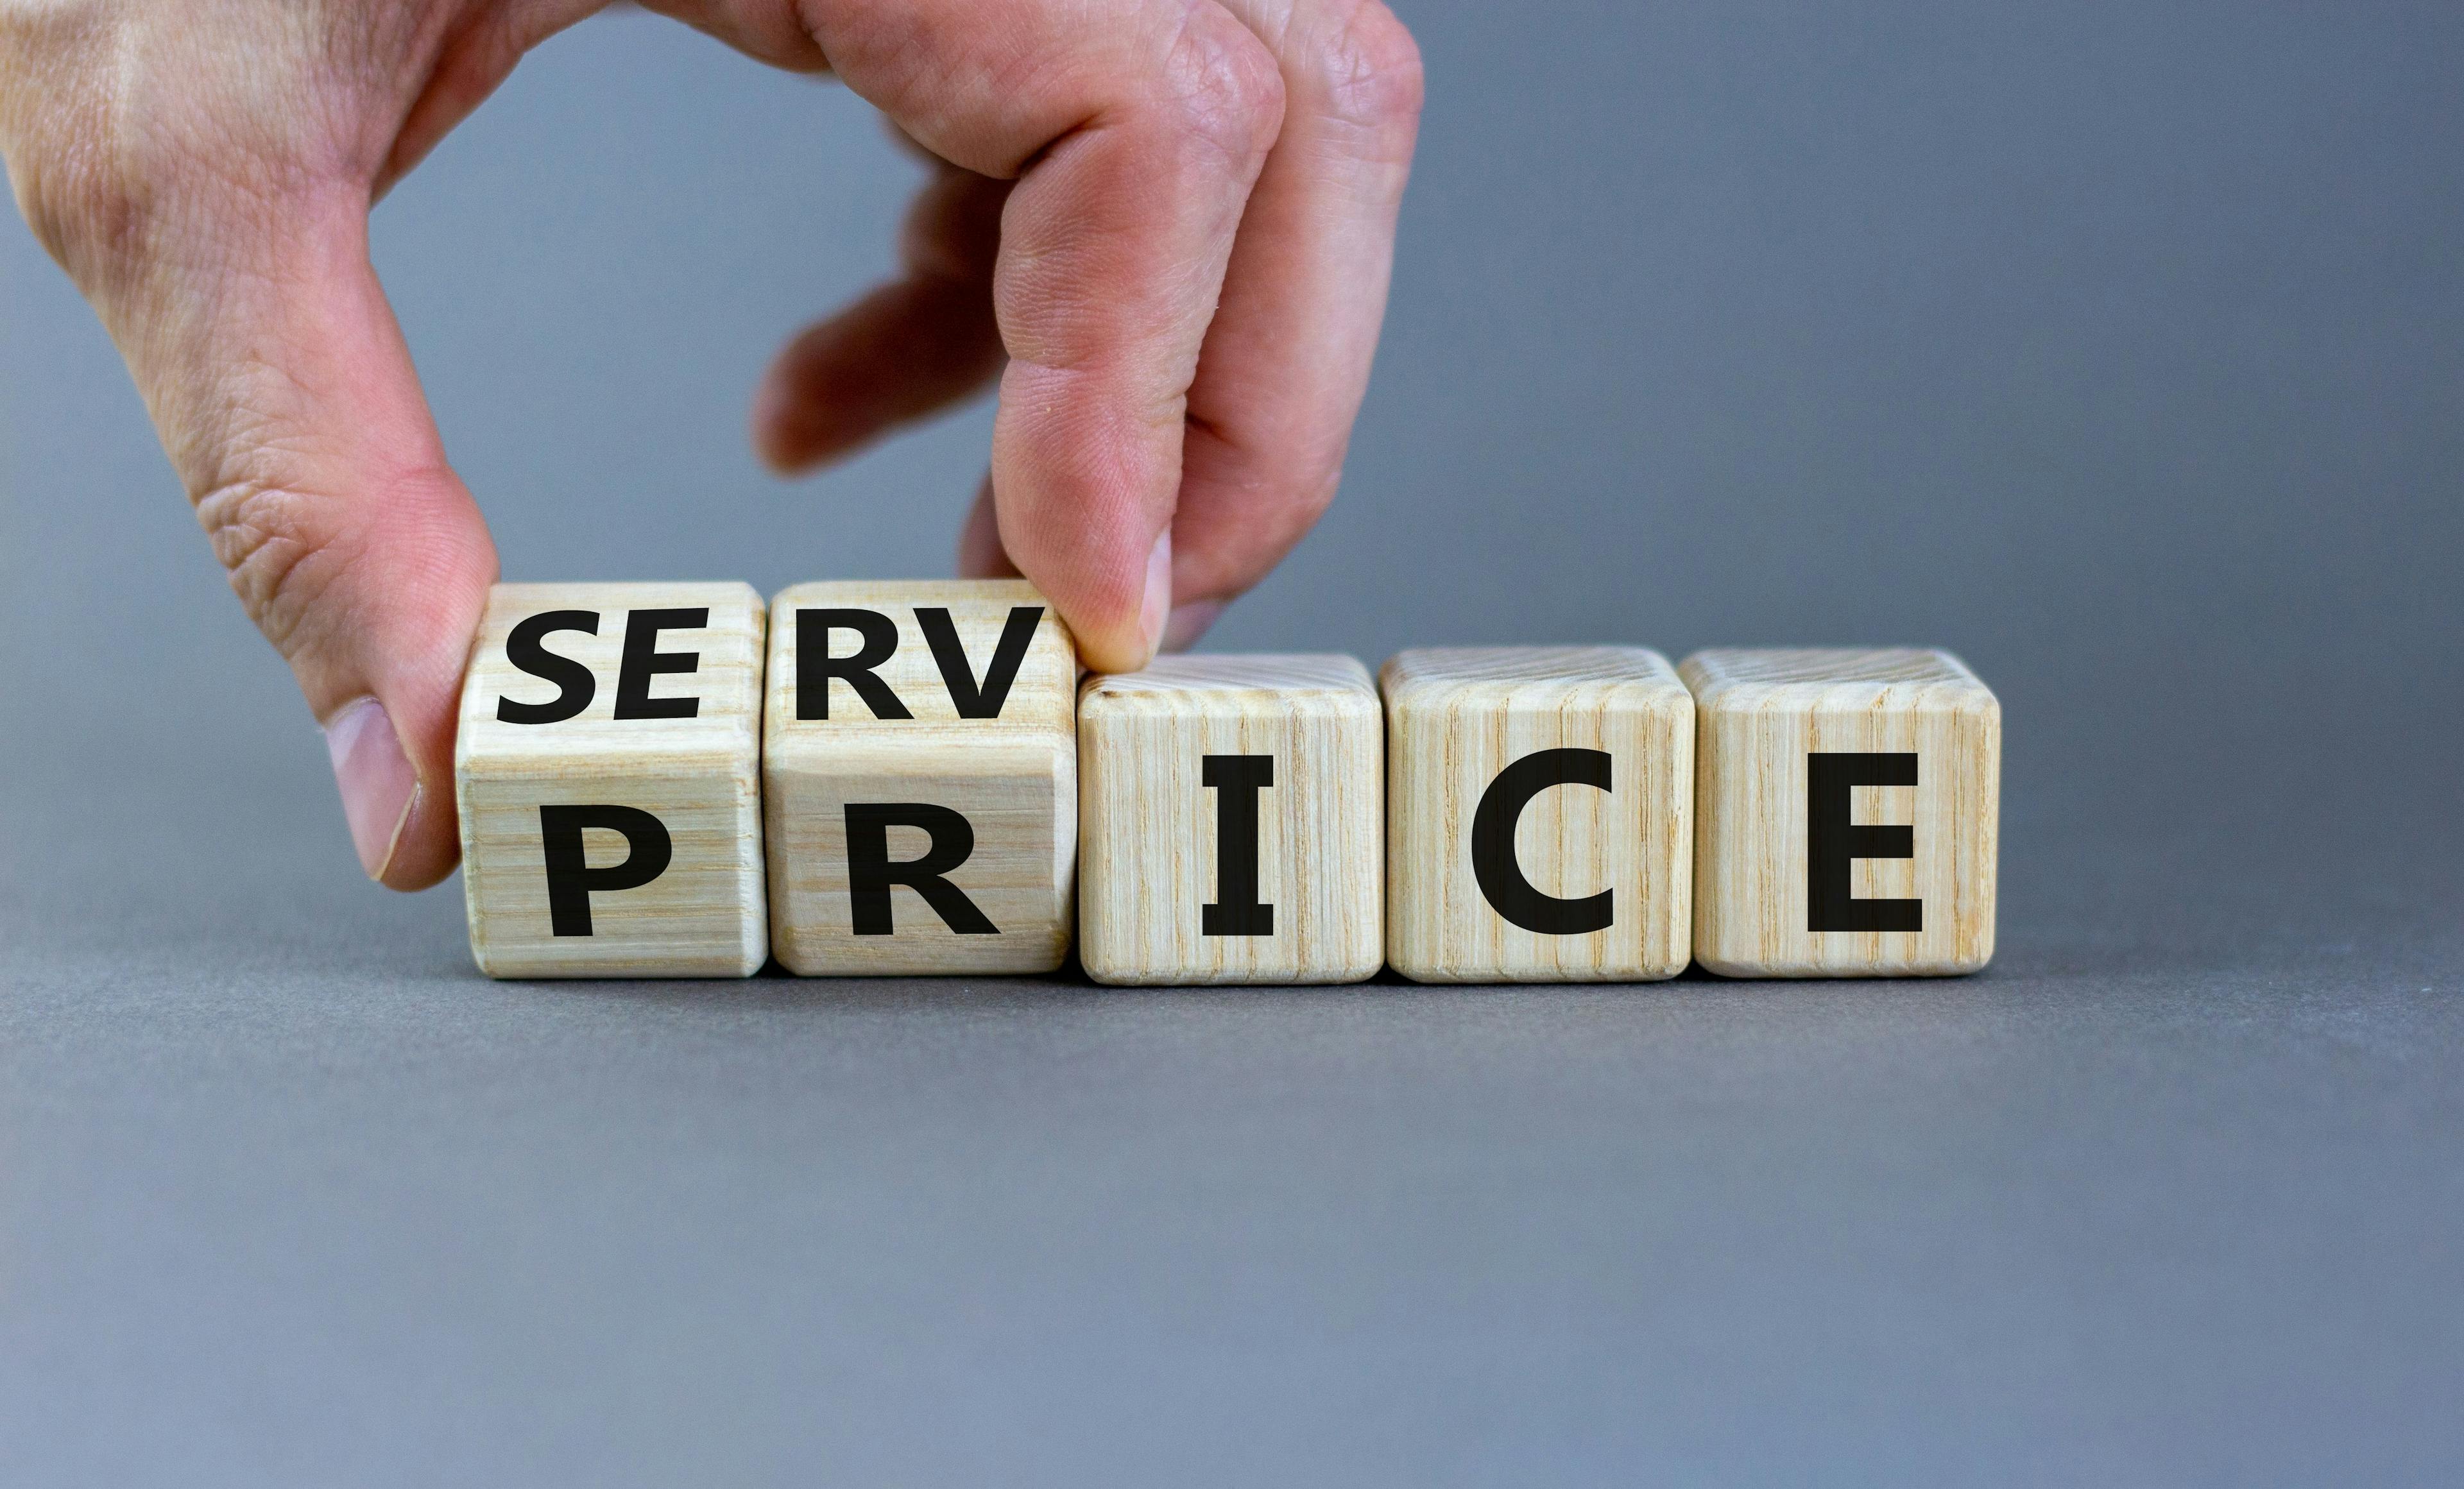 Wooden cubes spelling out "service price" on a white background.